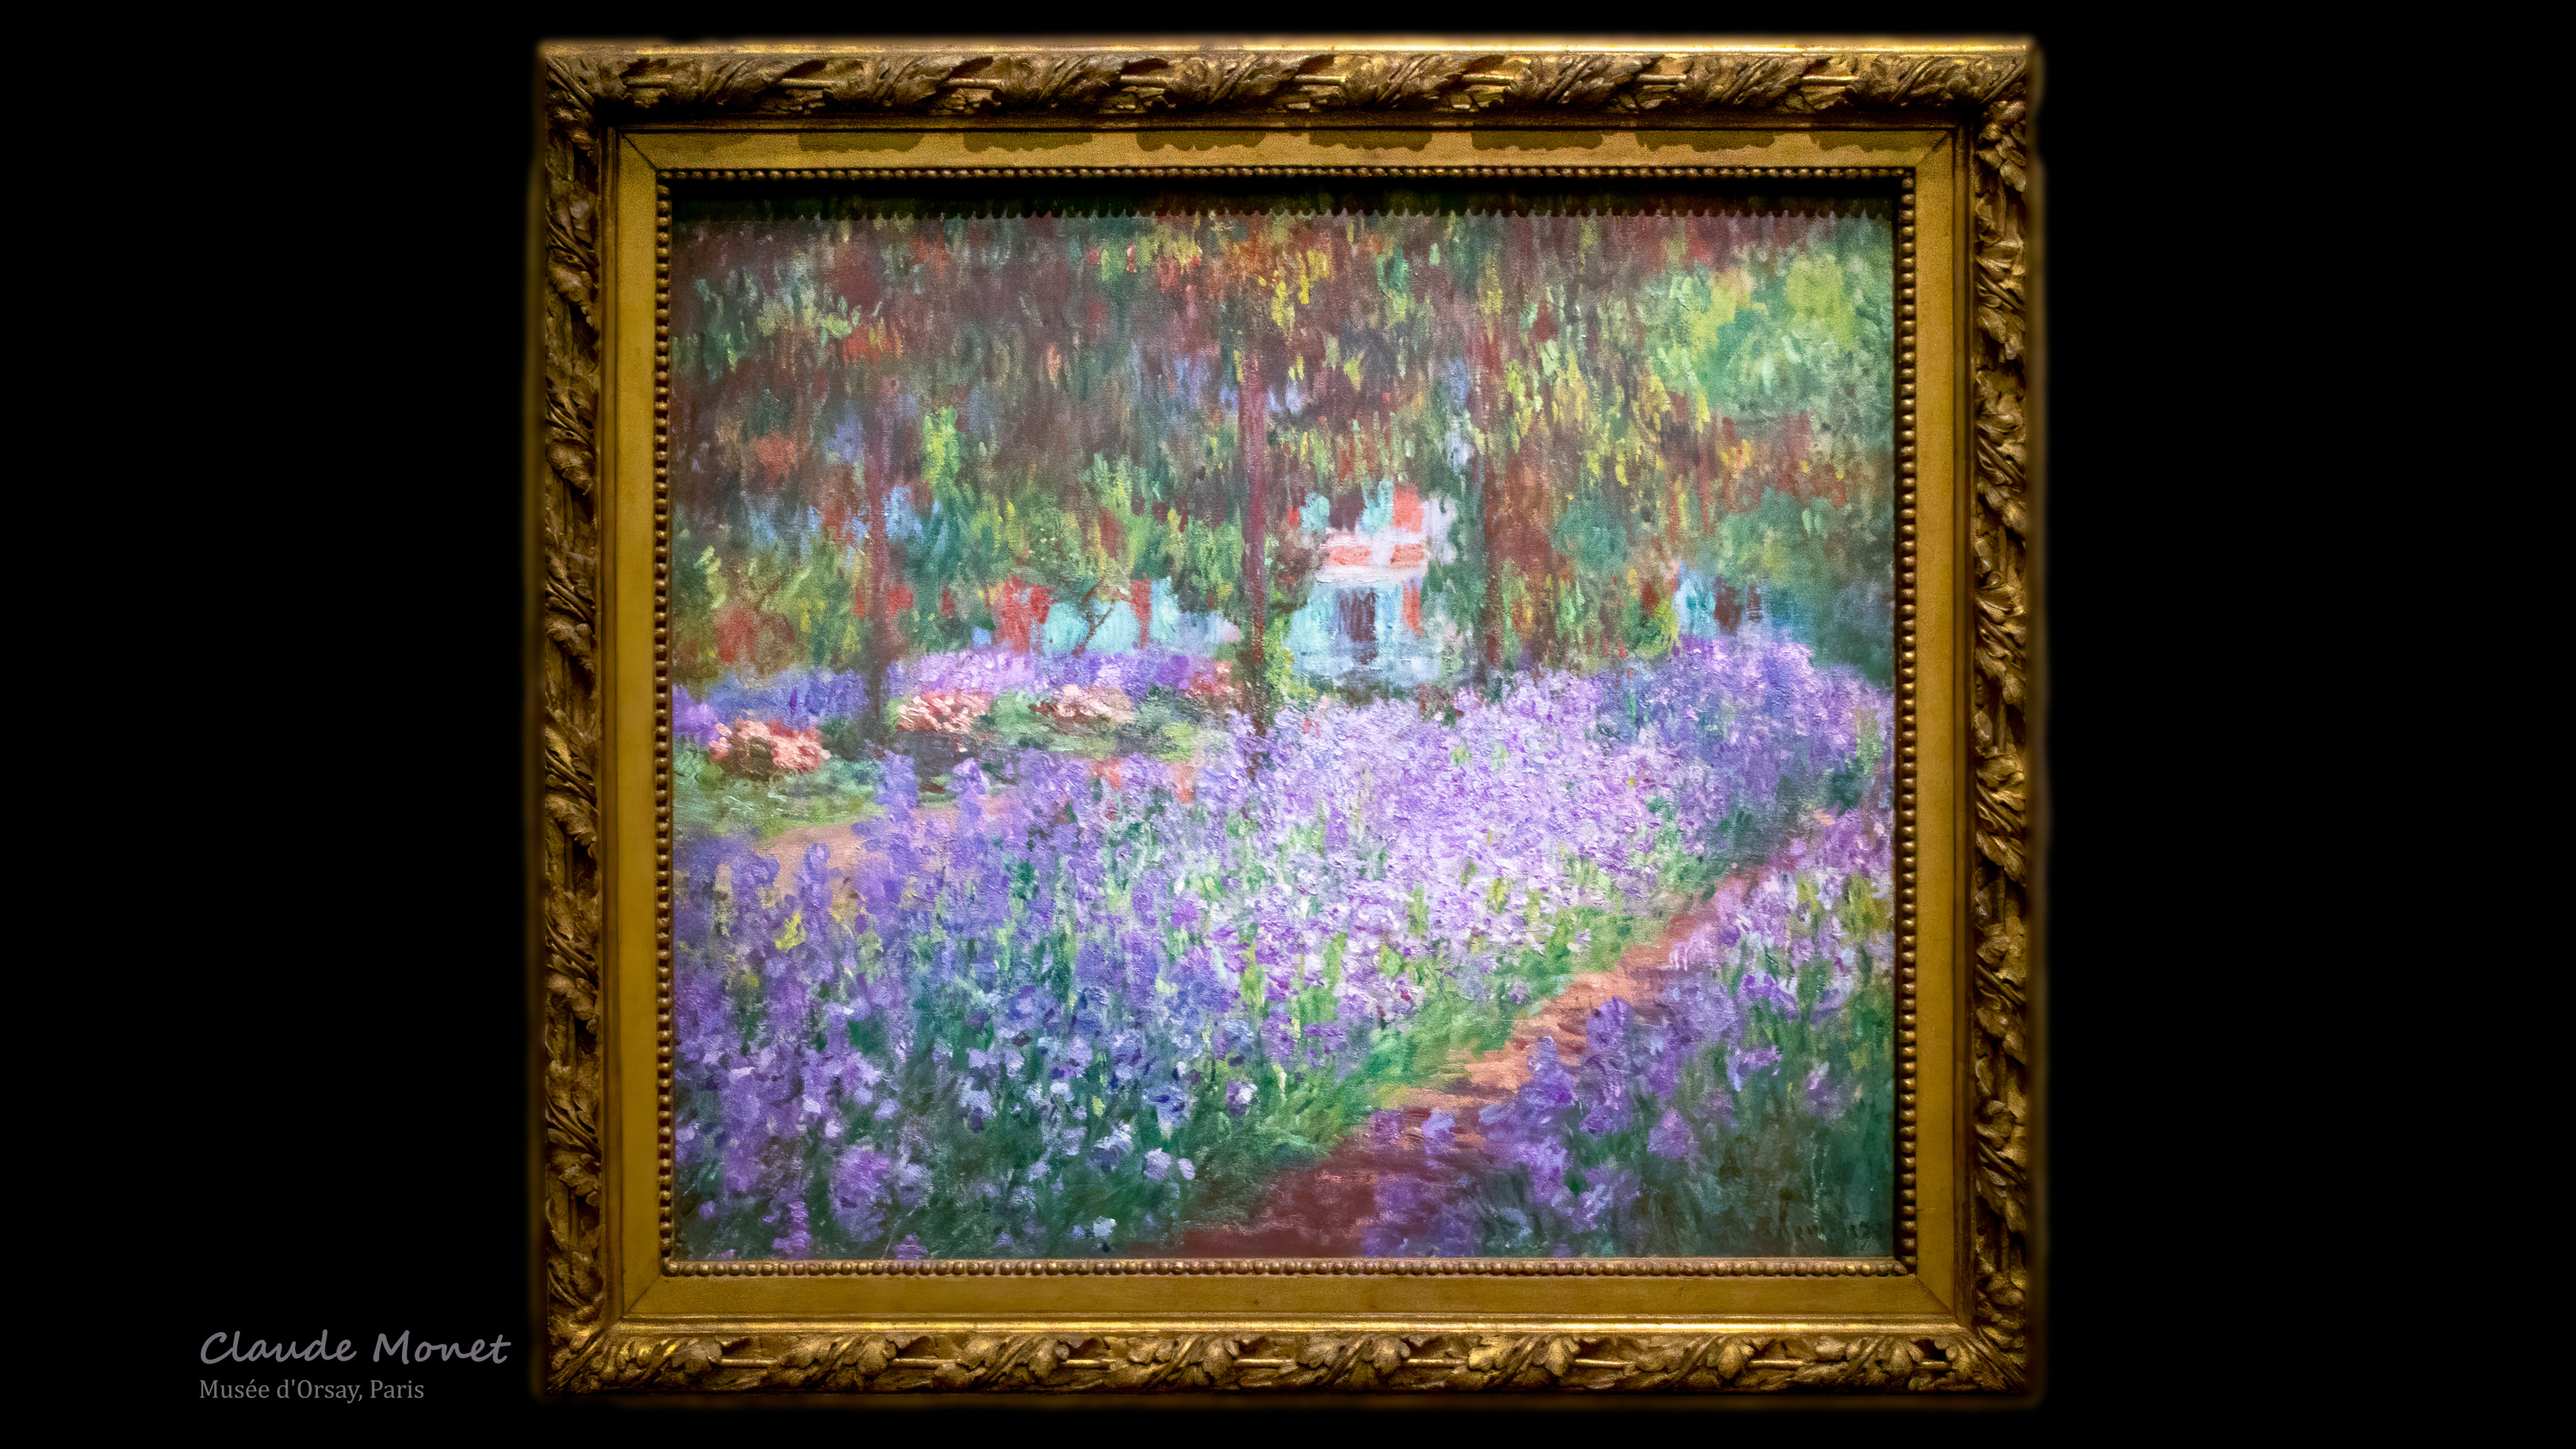 Capture the essence of nature with the painting wallpaper 'The Artist's Garden at Giverny' by Claude Monet.